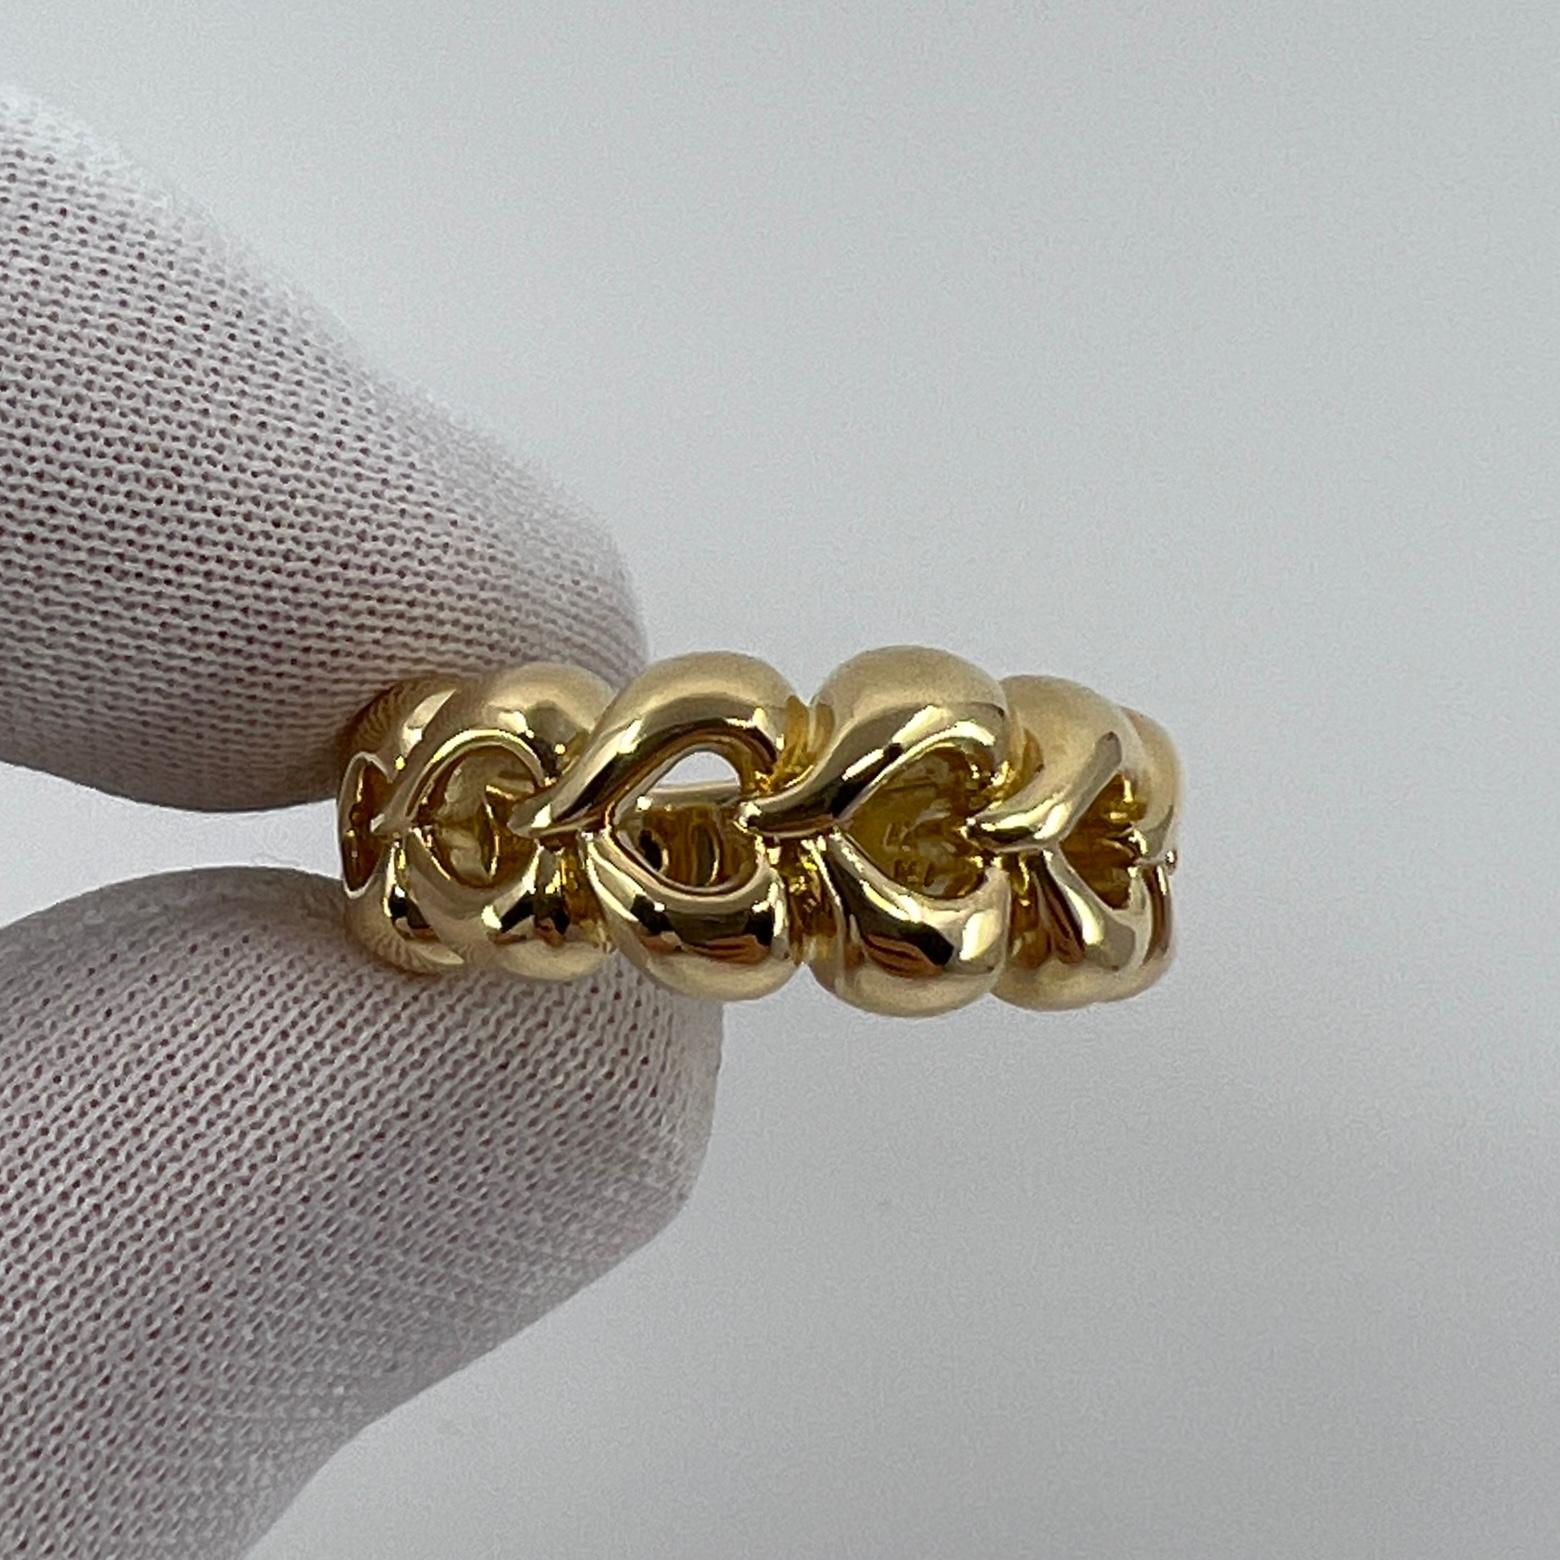 Rare Vintage Van Cleef & Arpels 18k Yellow Gold Open Heart Band Ring with Box For Sale 5